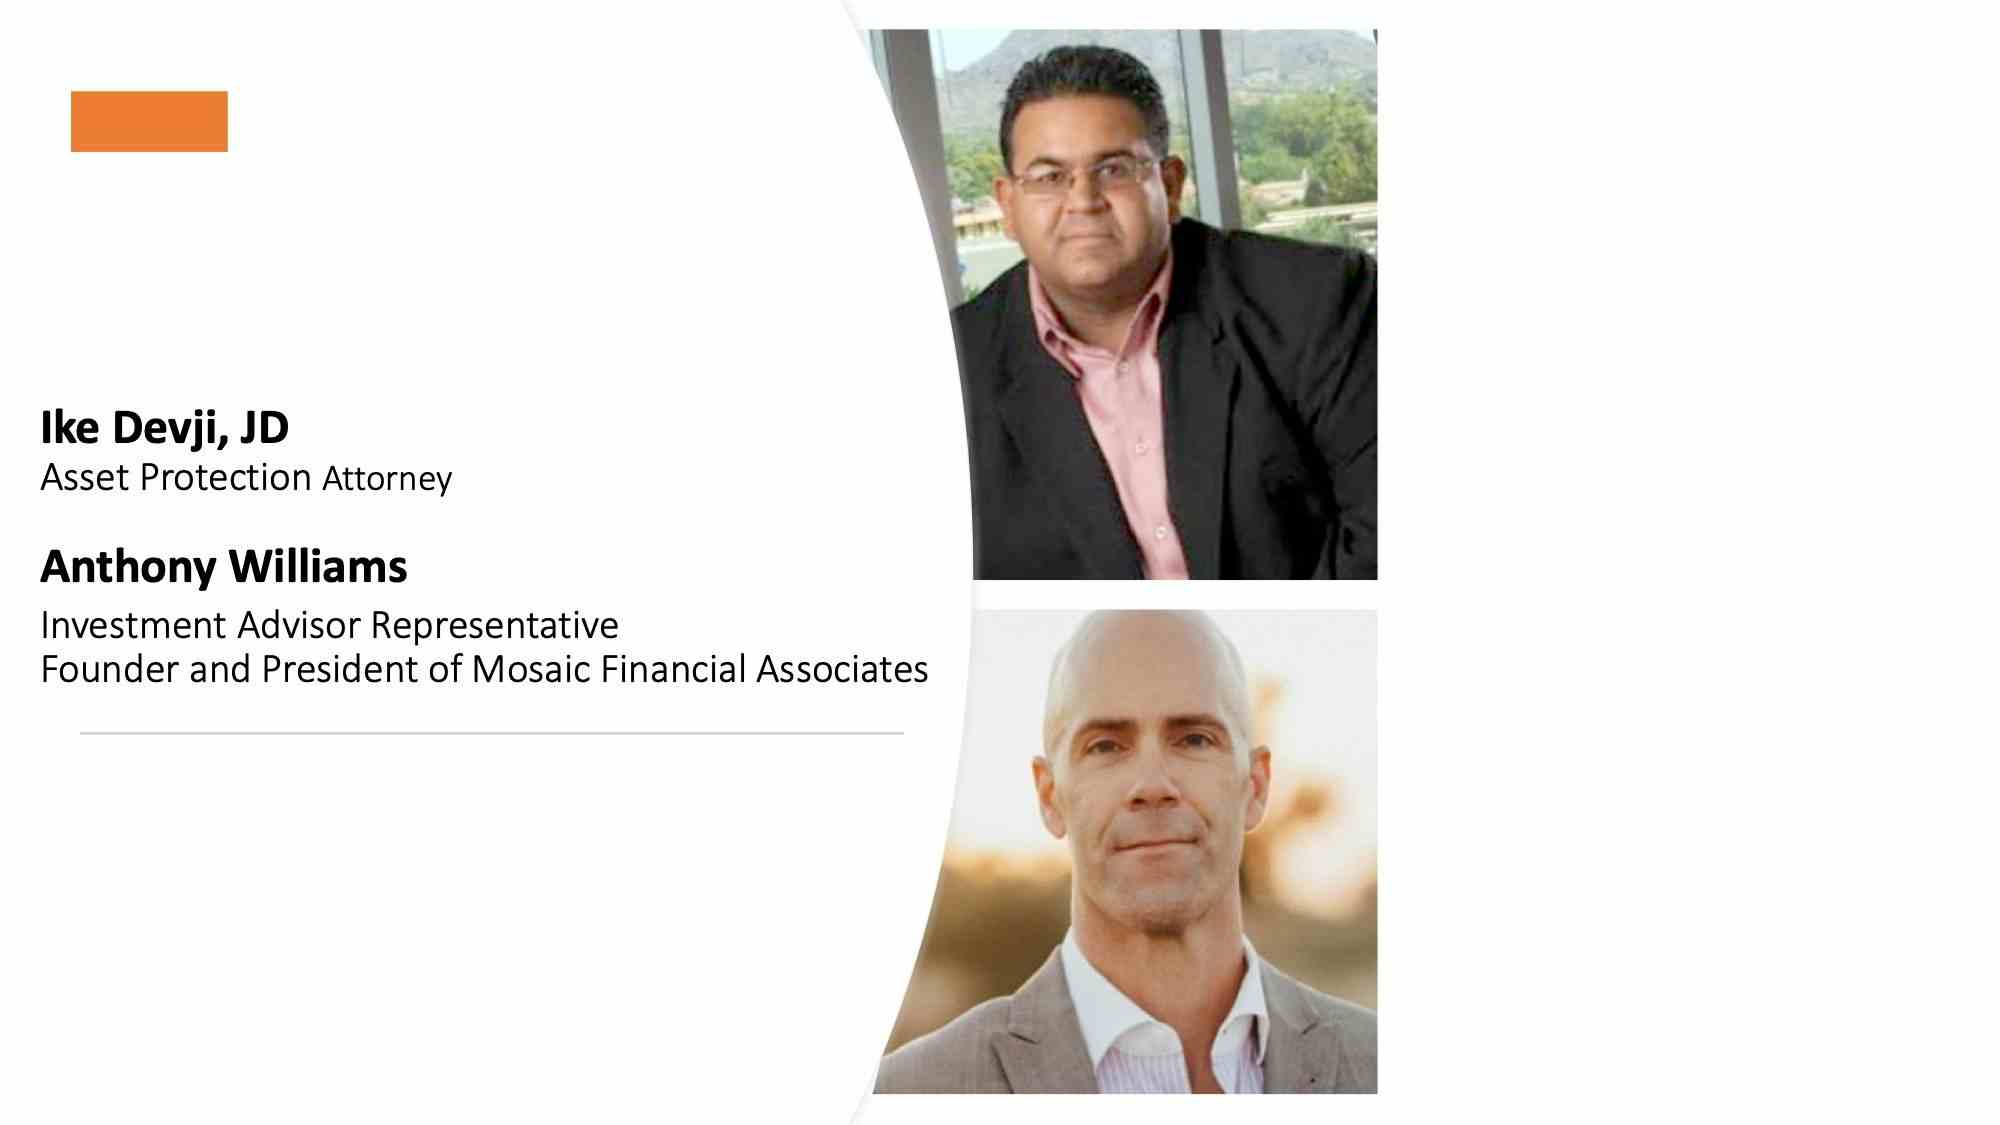 Ike Devji, JD and Anthony Williams discuss wealth management issues